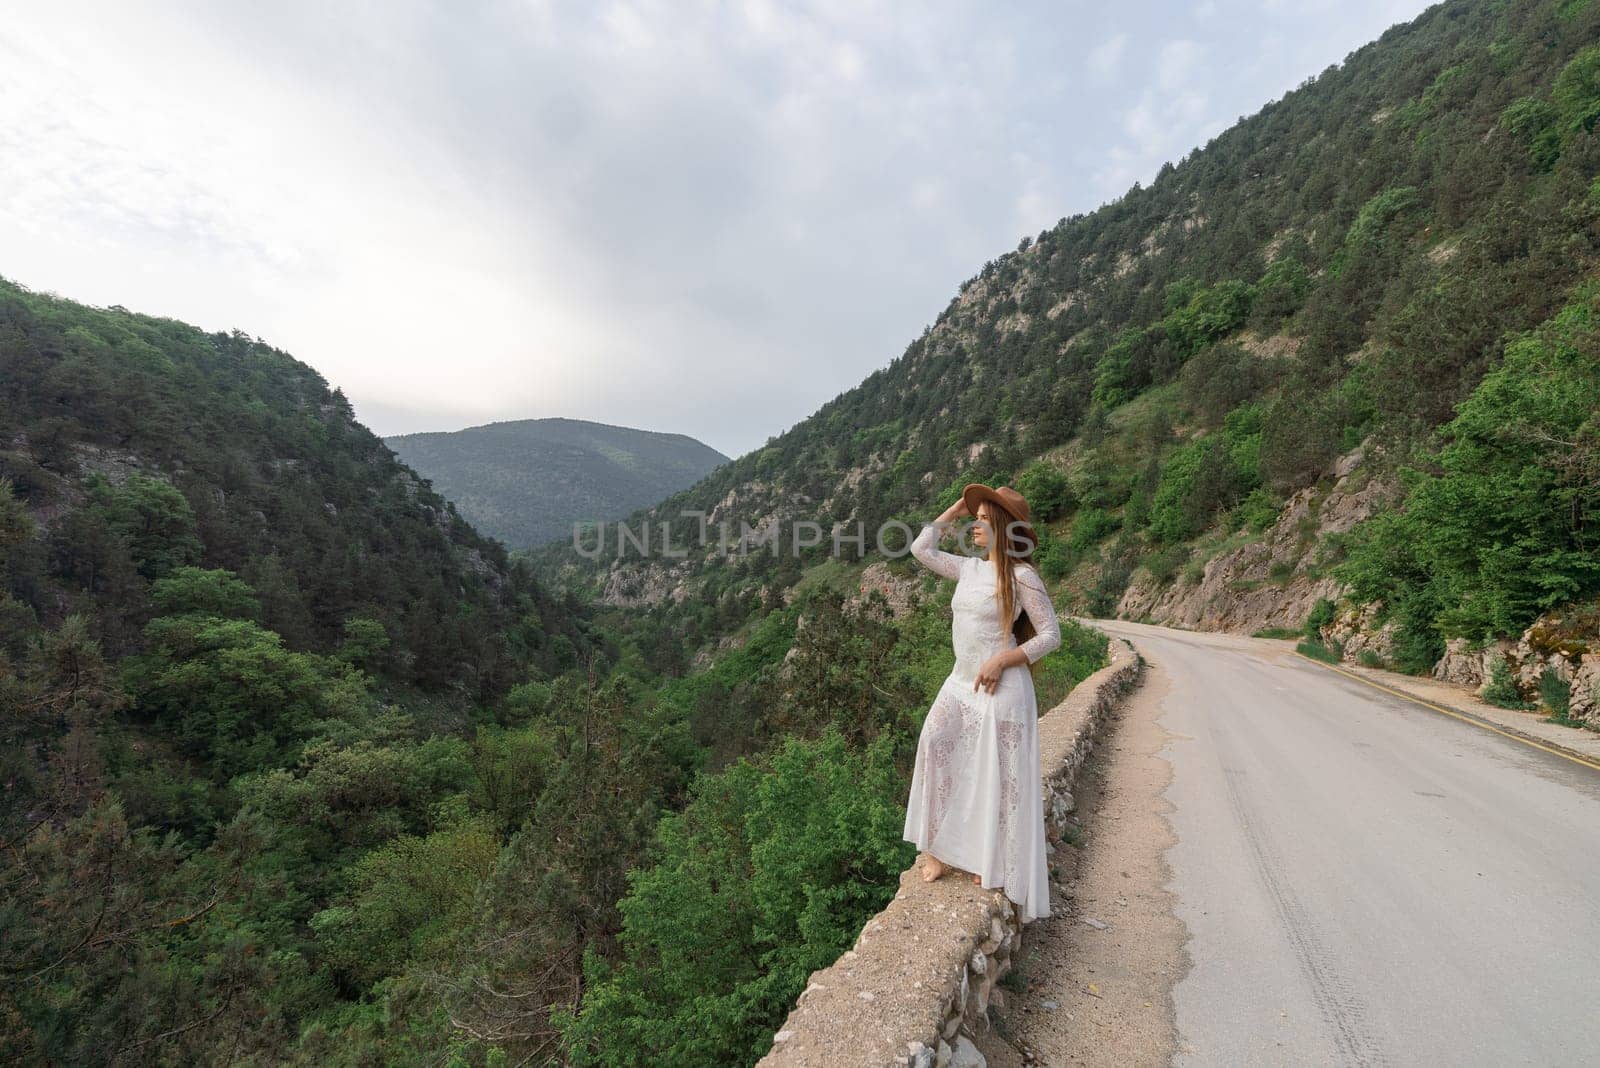 A woman in a white dress stands on a road overlooking a mountain range by Matiunina